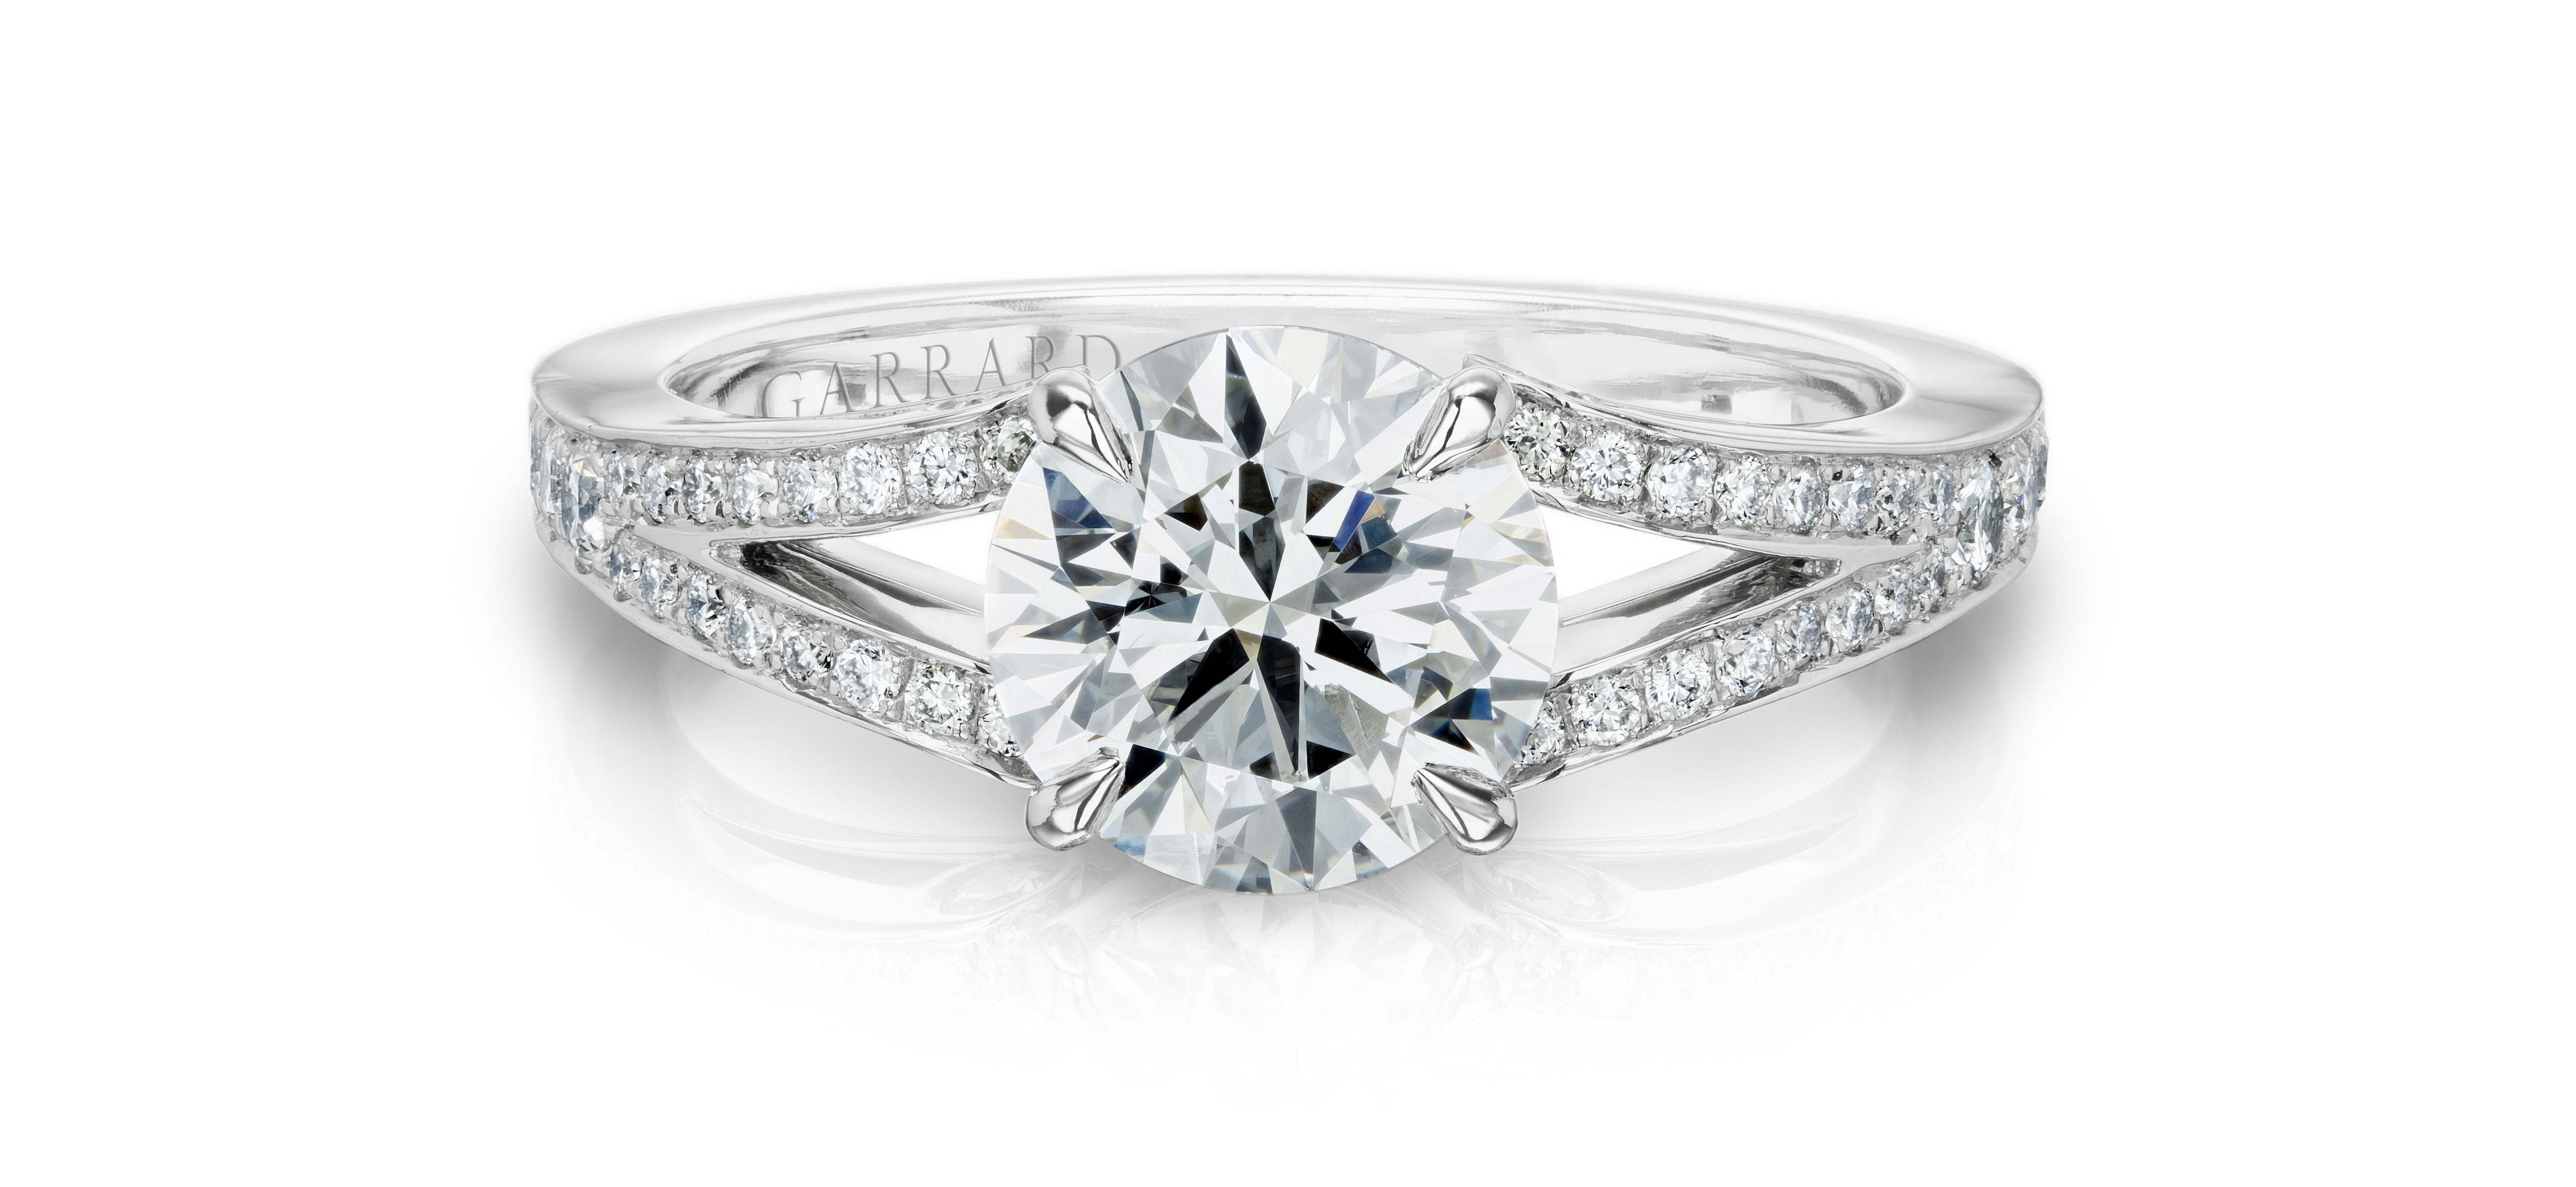 White magic: a glittering layring with fine diamonds from London institution Garrard